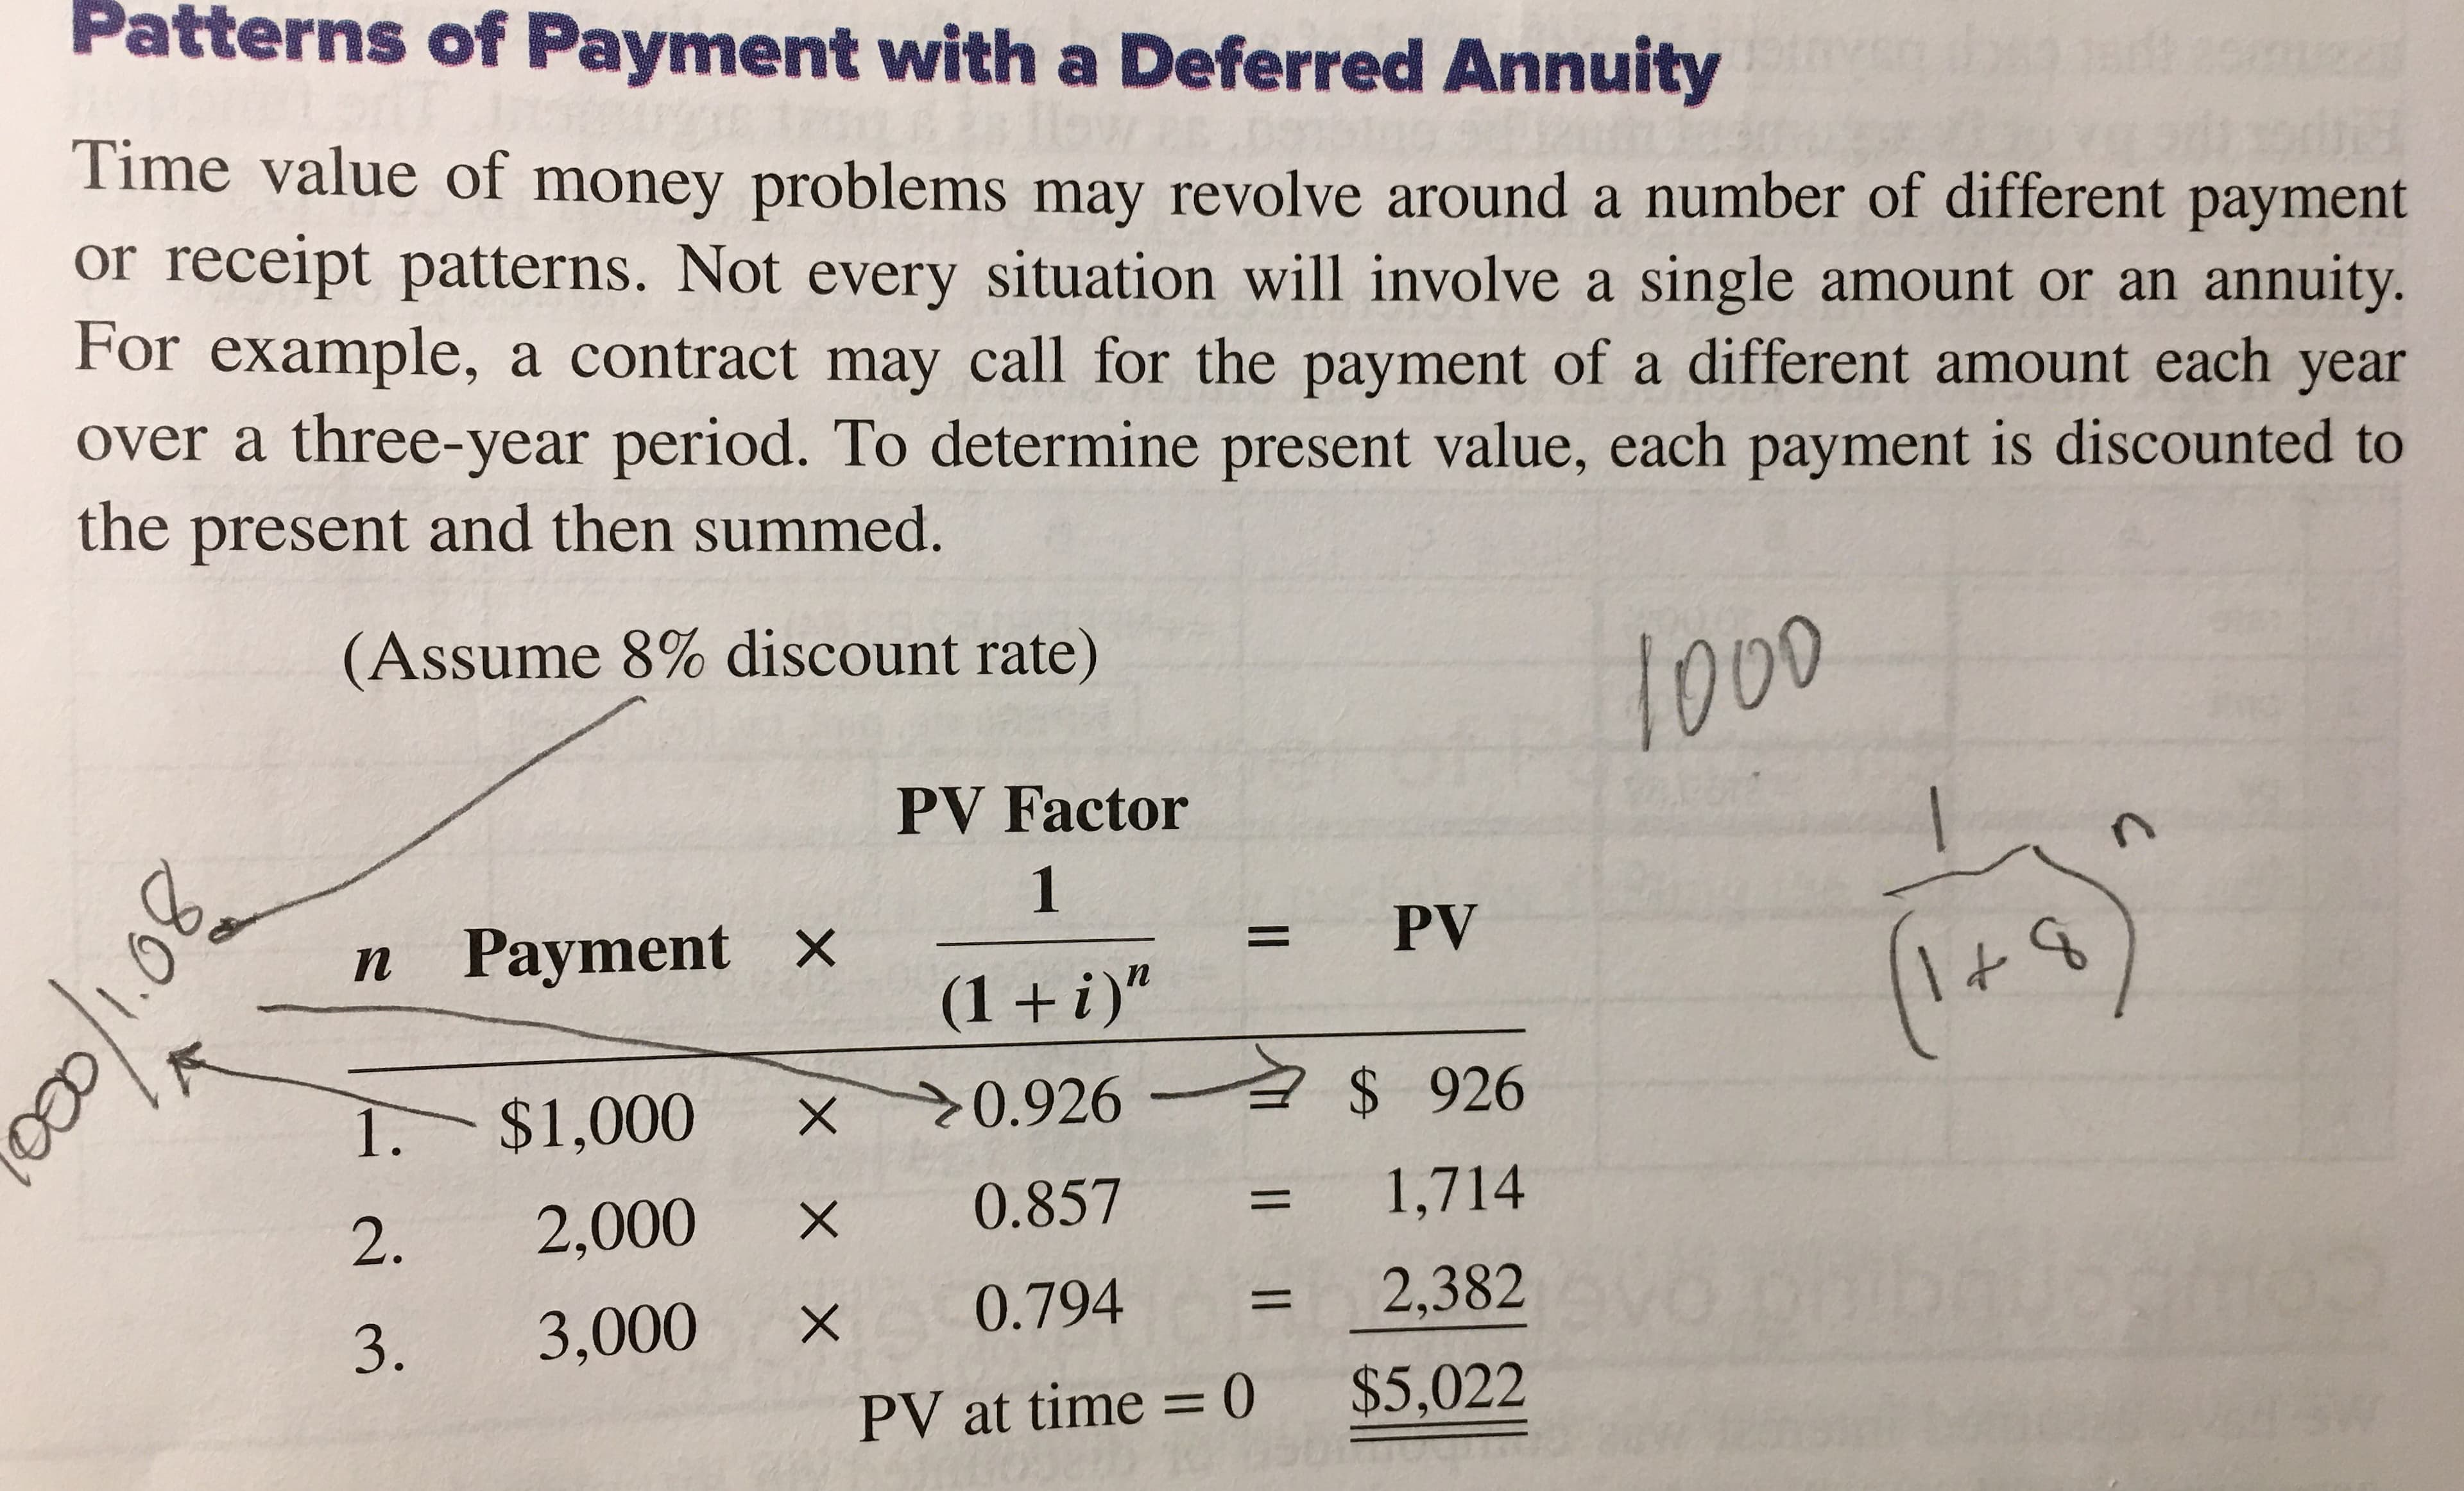 Patterns of Payment with a Deferred Annuity
Time value of money problems may revolve around a number of different payment
or receipt patterns. Not every situation will involve a single amount or an annuity.
For example, a contract may call for the payment of a different amount each year
over a three-year period. To determine present value, each payment is discounted to
the present and then summed.
(Assume 8% discount rate)
10
PV Factor
n Payment X
PV
п
of
(1 +i)"
>0.926
24926
1. $1,000
1,714
0.857
2,000
%3D
2.
2,382
0.794
%3D
3,000
3.
$5,022
PV at time = 0
